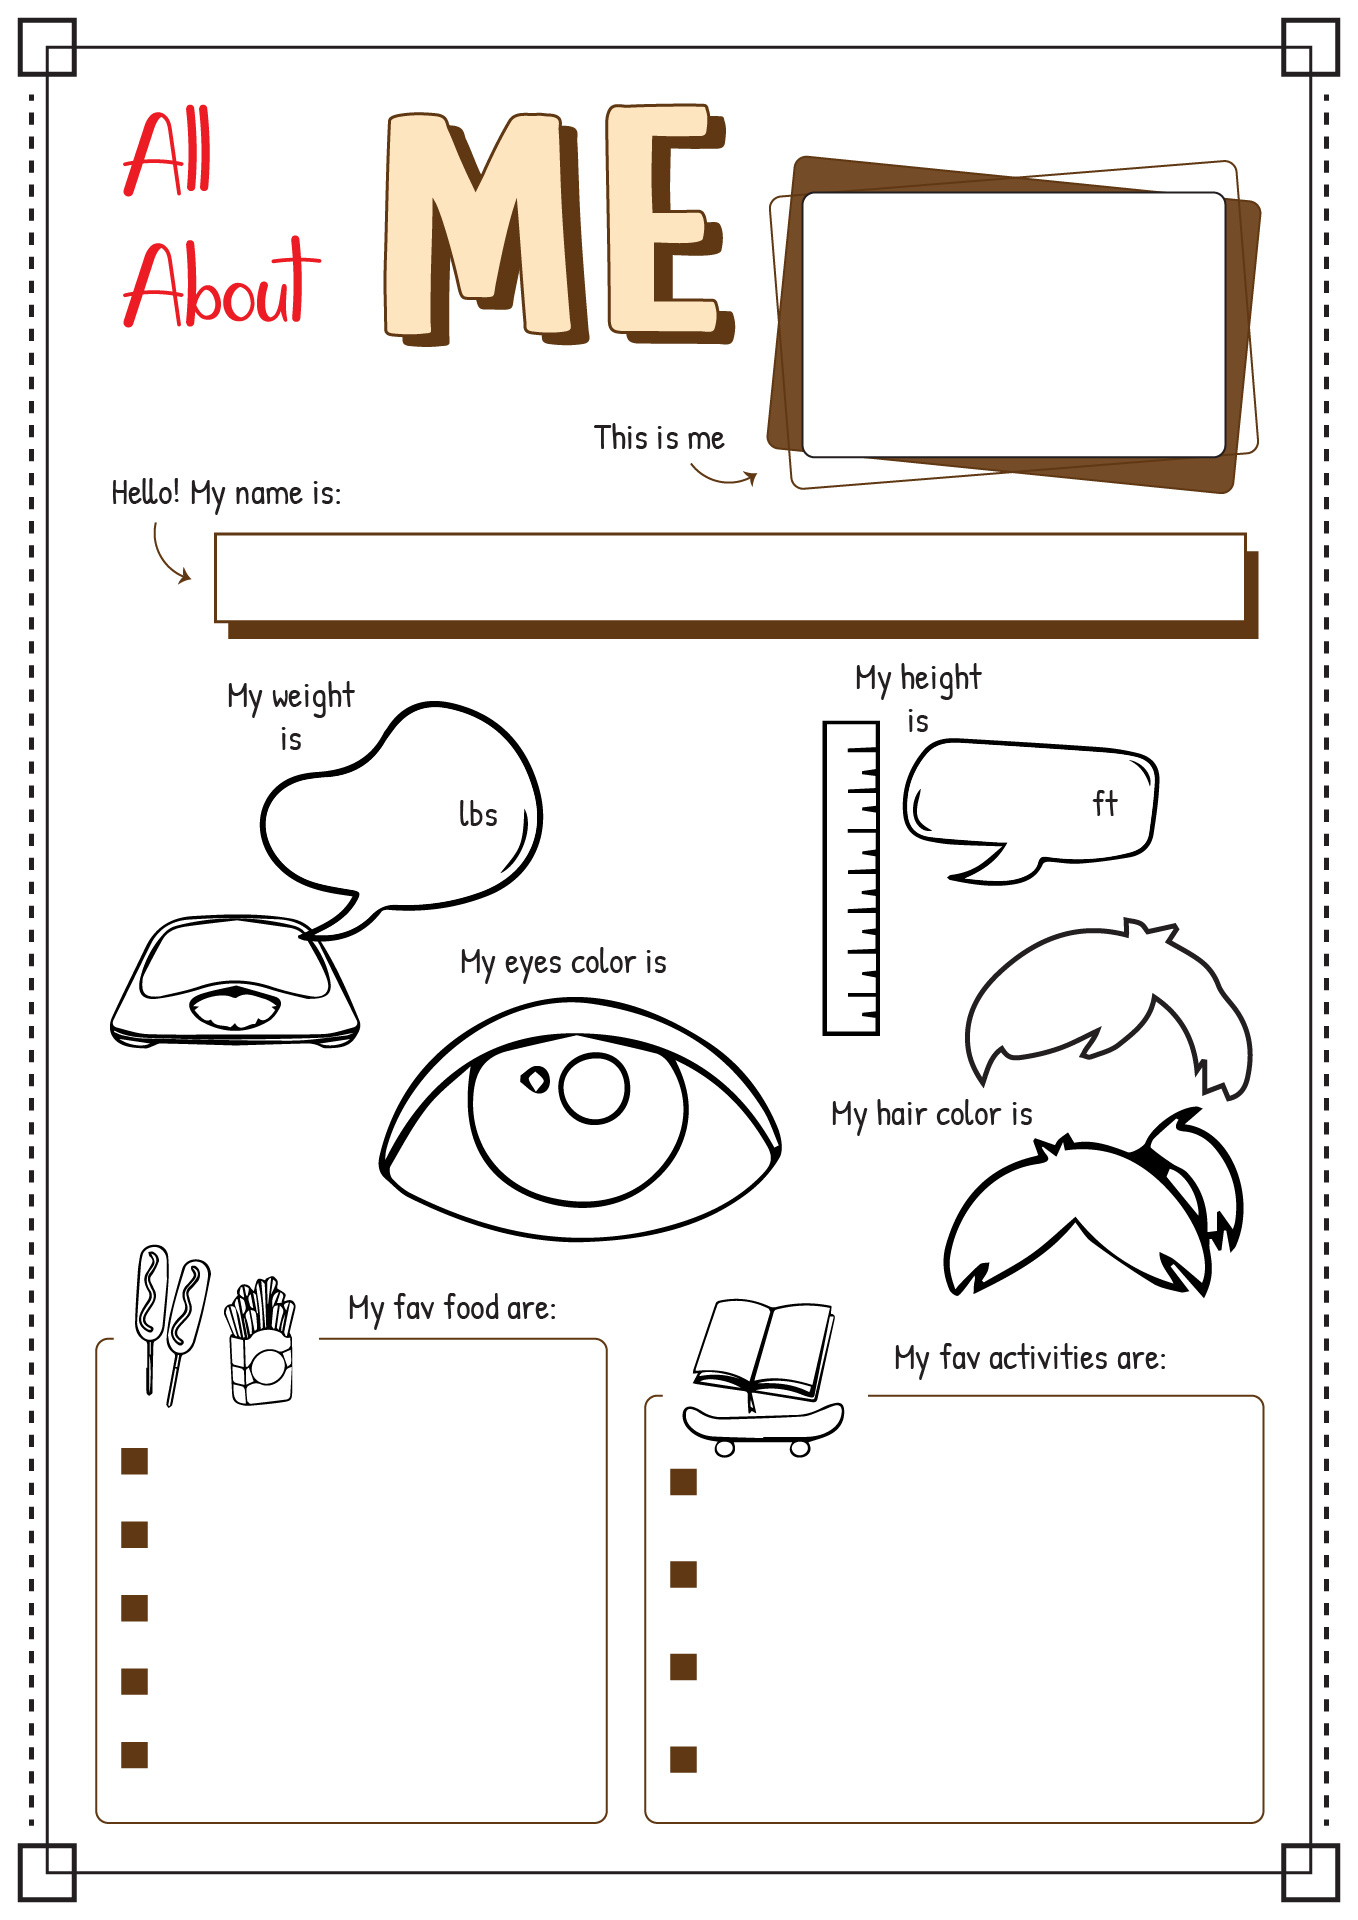 Preschool All About Me Worksheets Printables